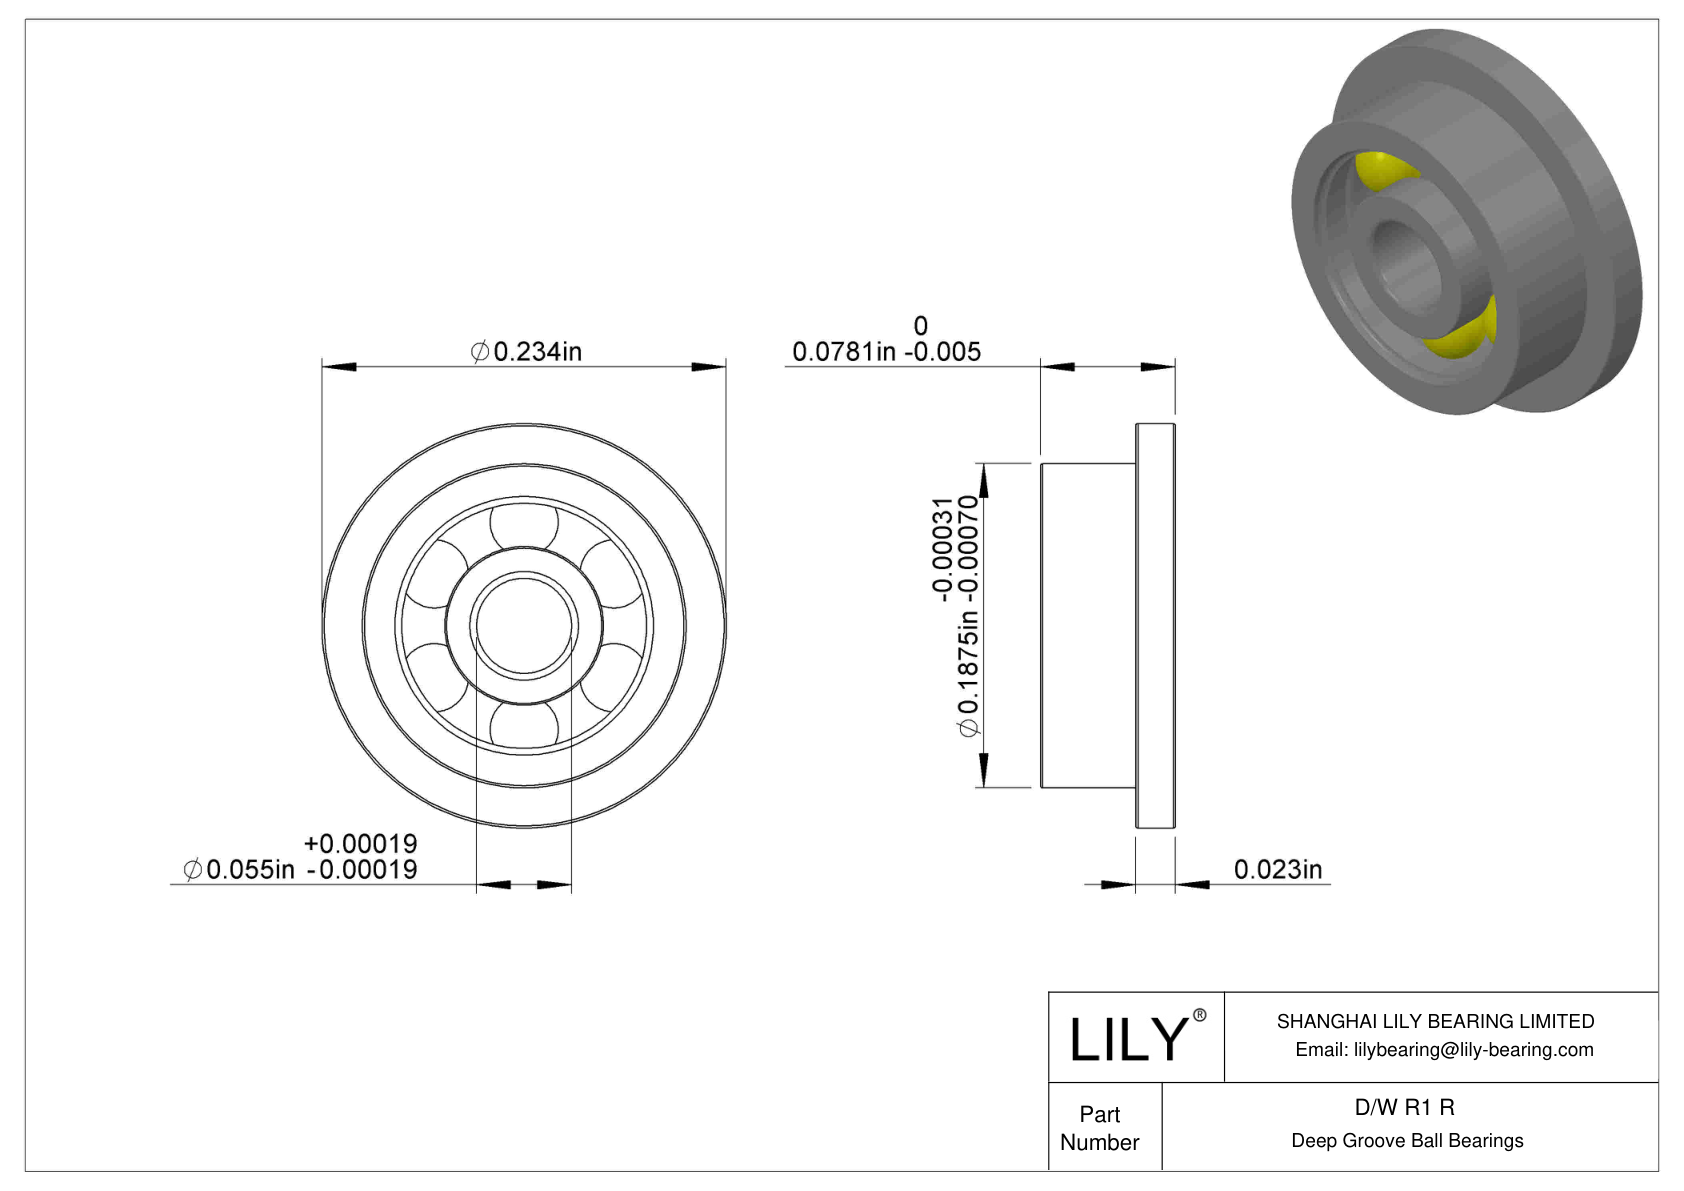 D/W R1 R Flanged Ball Bearings cad drawing